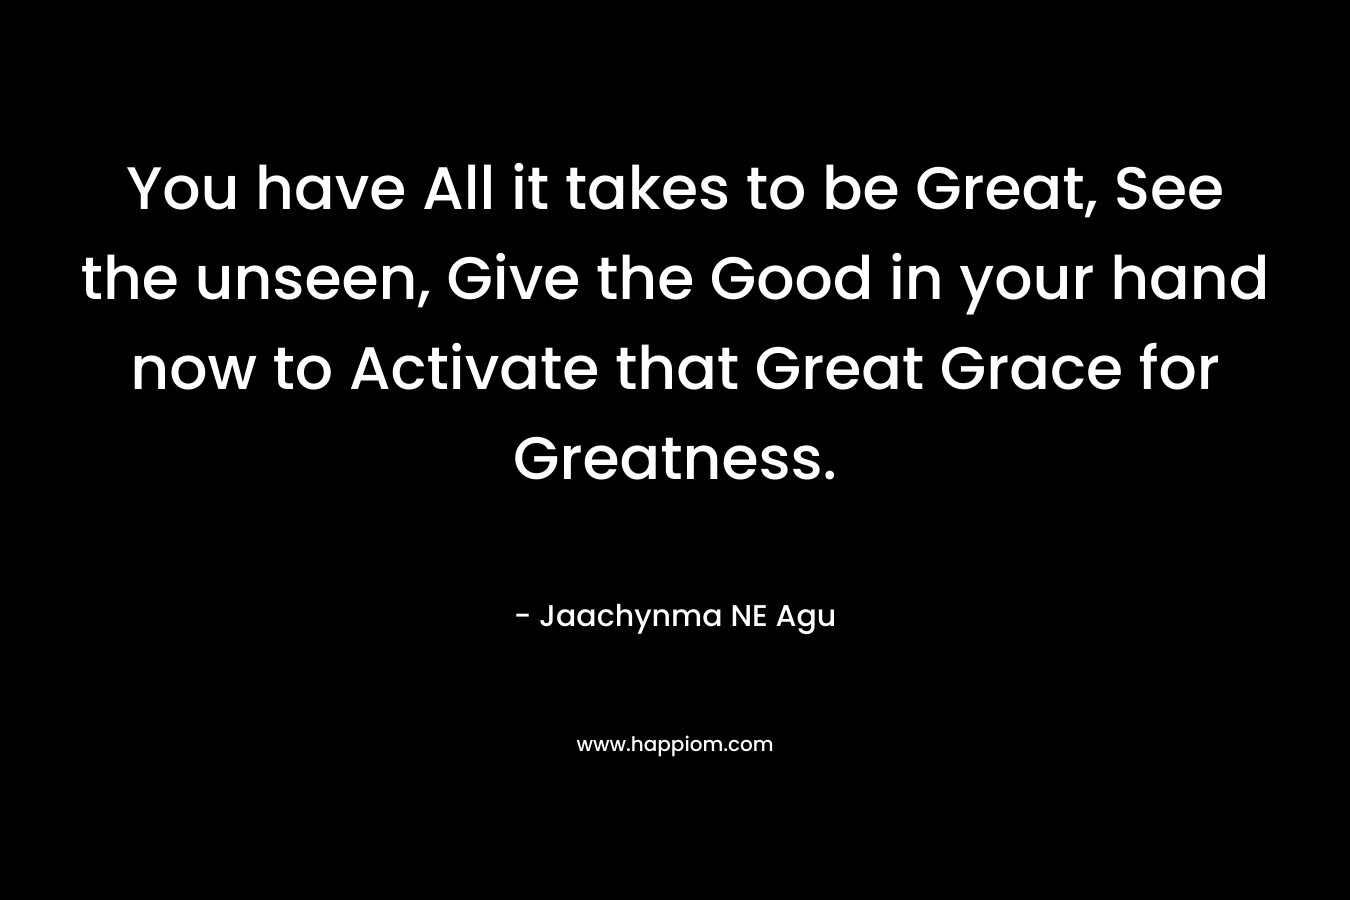 You have All it takes to be Great, See the unseen, Give the Good in your hand now to Activate that Great Grace for Greatness. – Jaachynma NE Agu